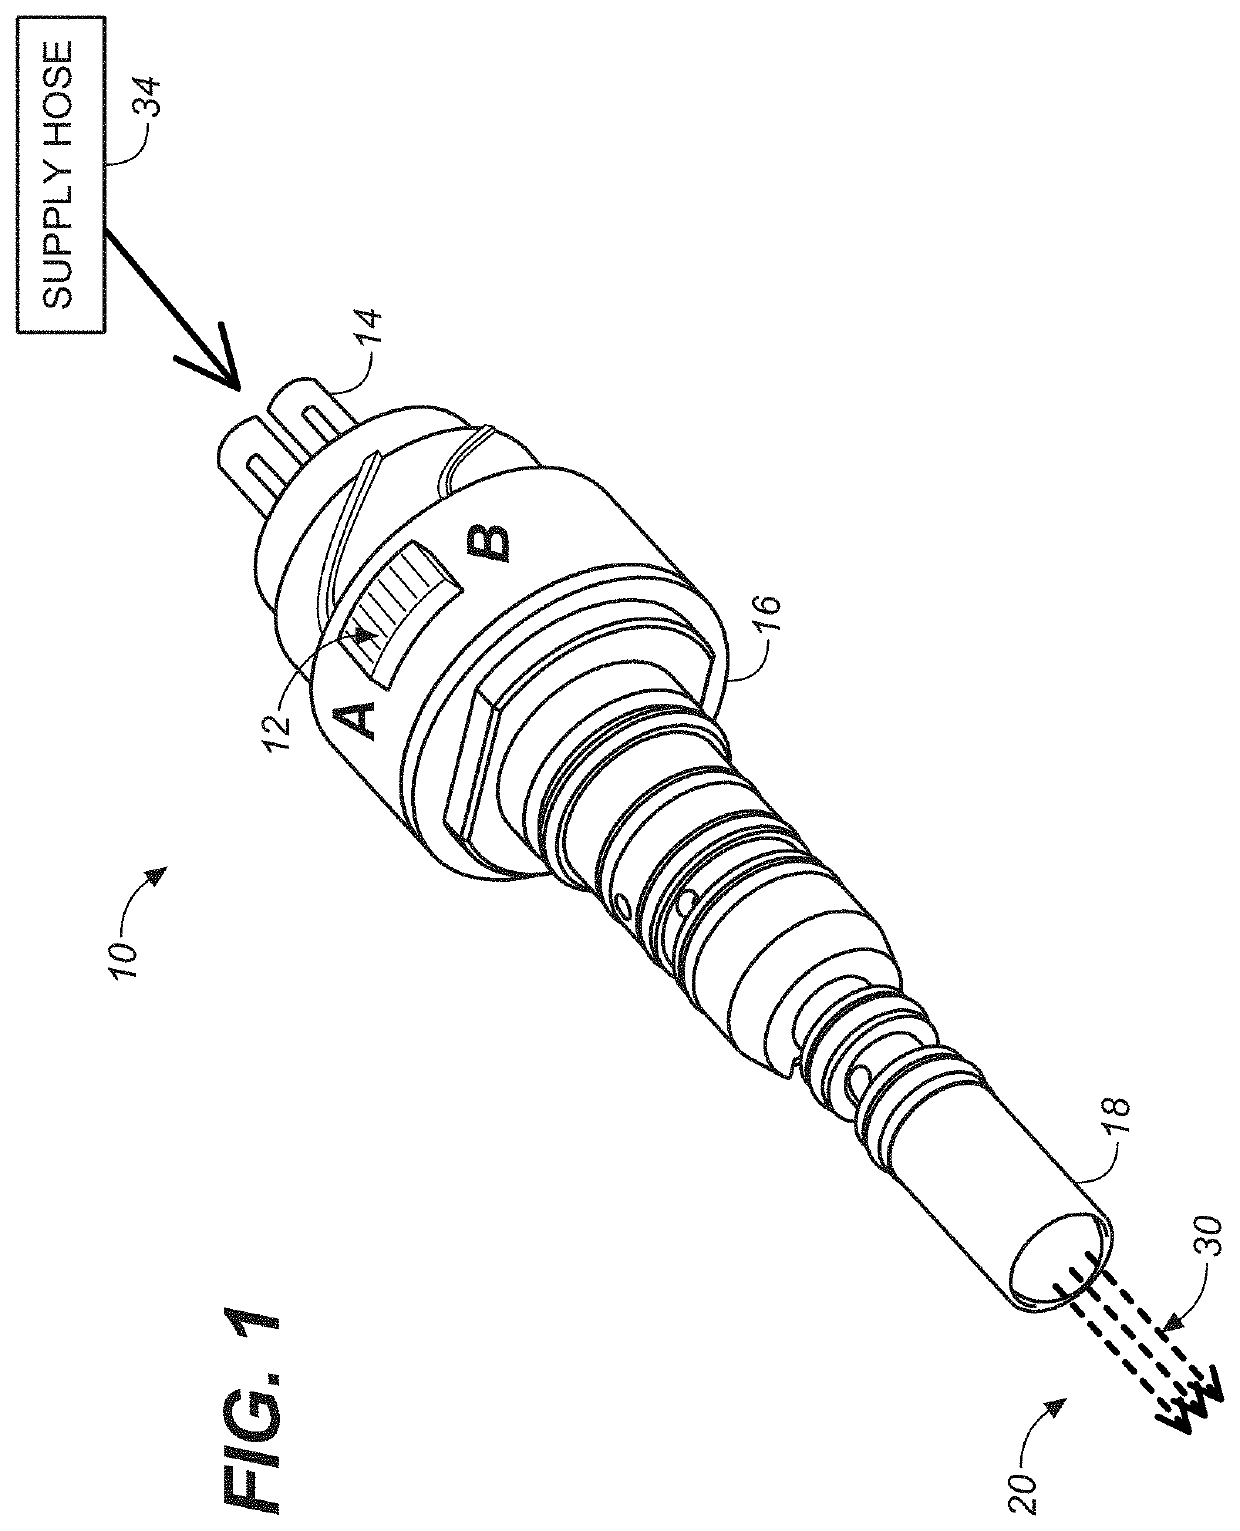 Dental handpiece, motor and coupler with multi-wavelength light outputs